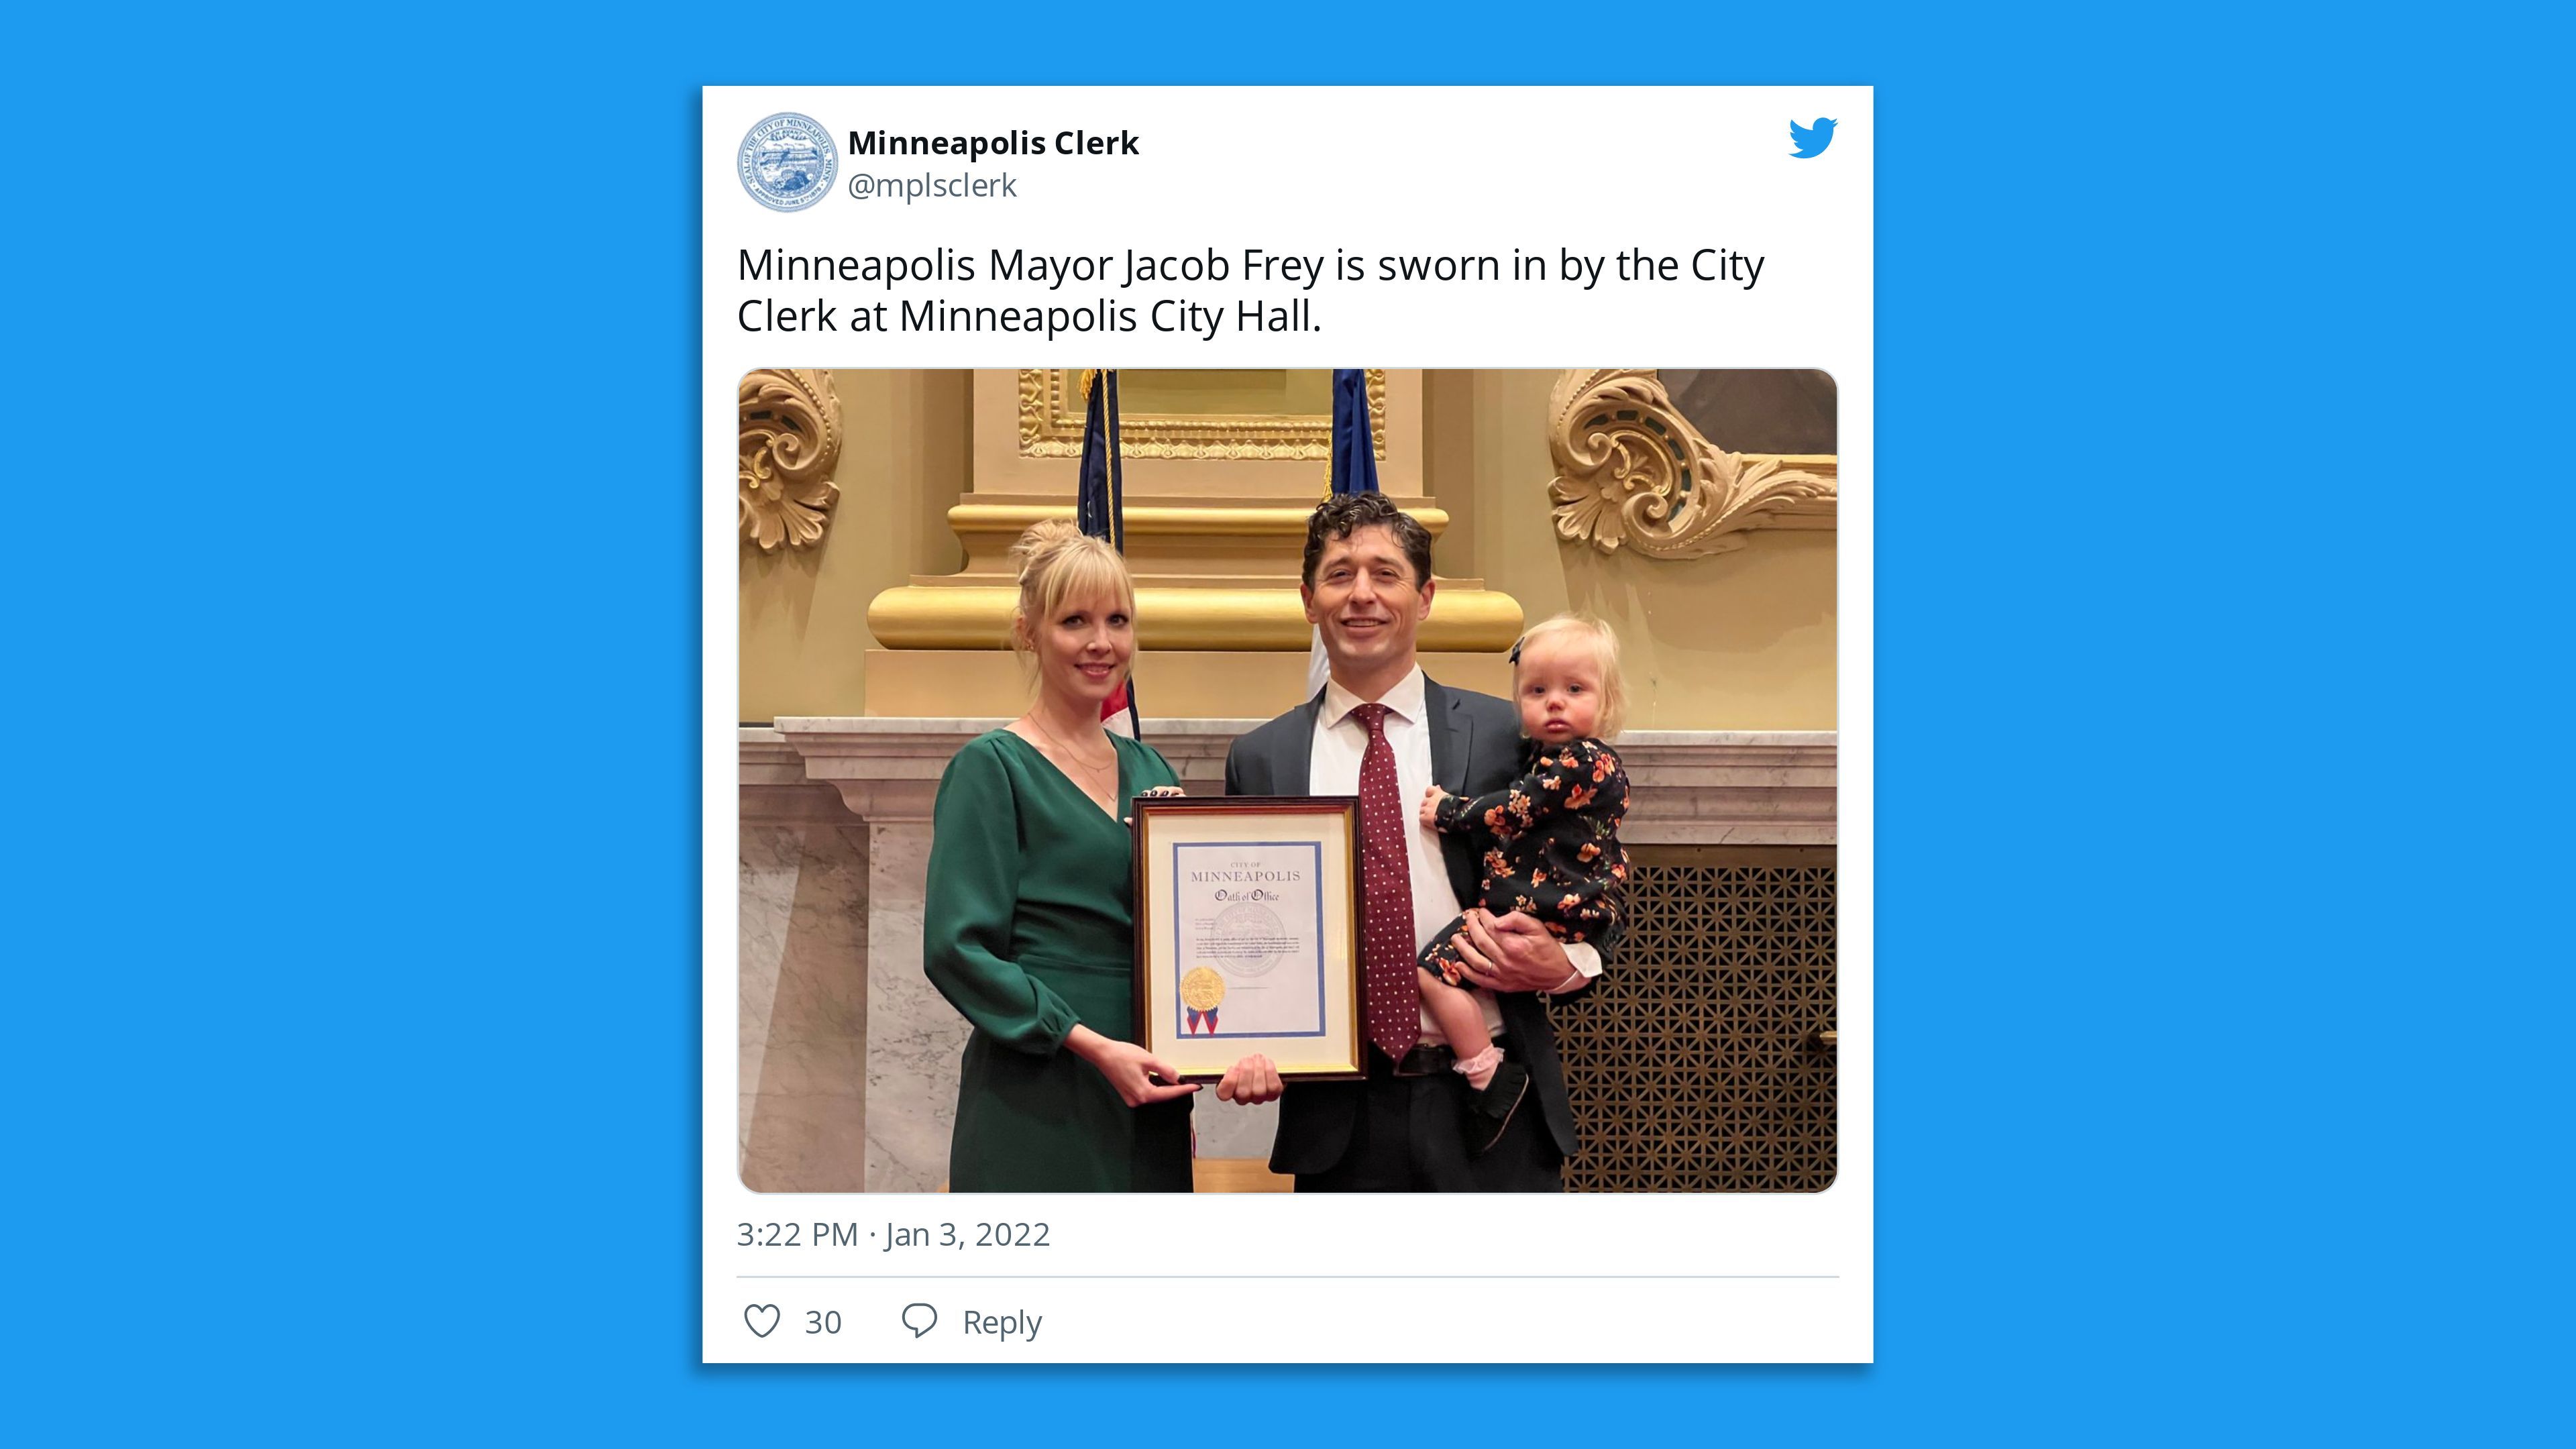 tweet of mayor frey and his wife at his oath of office